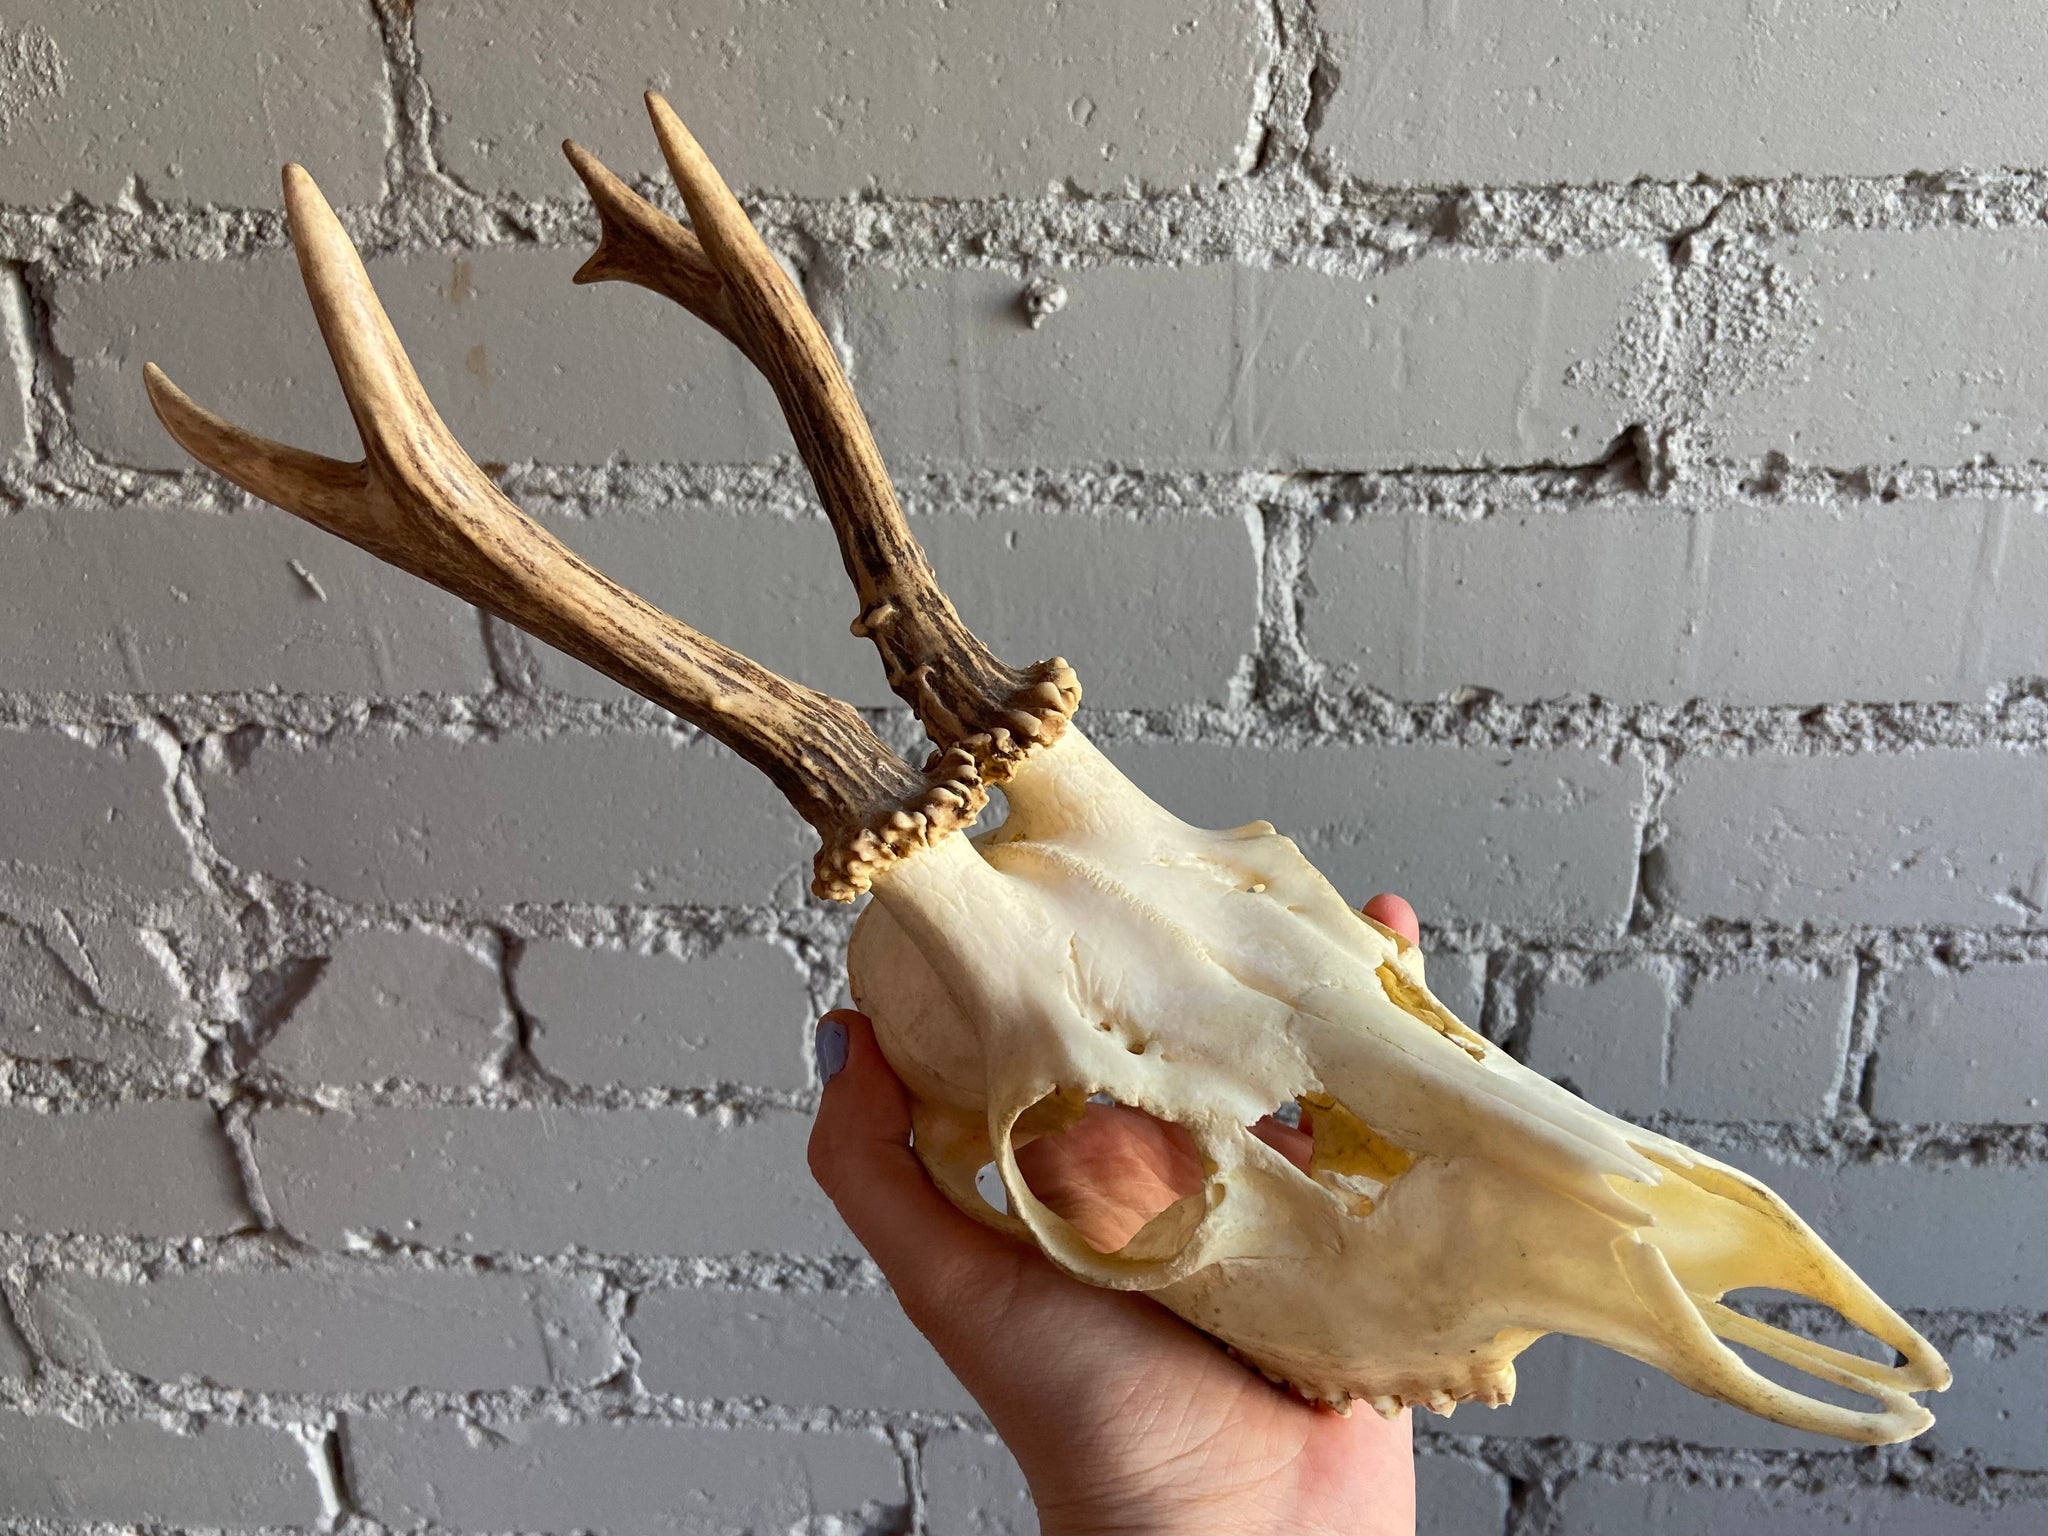 How Do I Make This Deer Skull I Found Clean And White?, 45% OFF